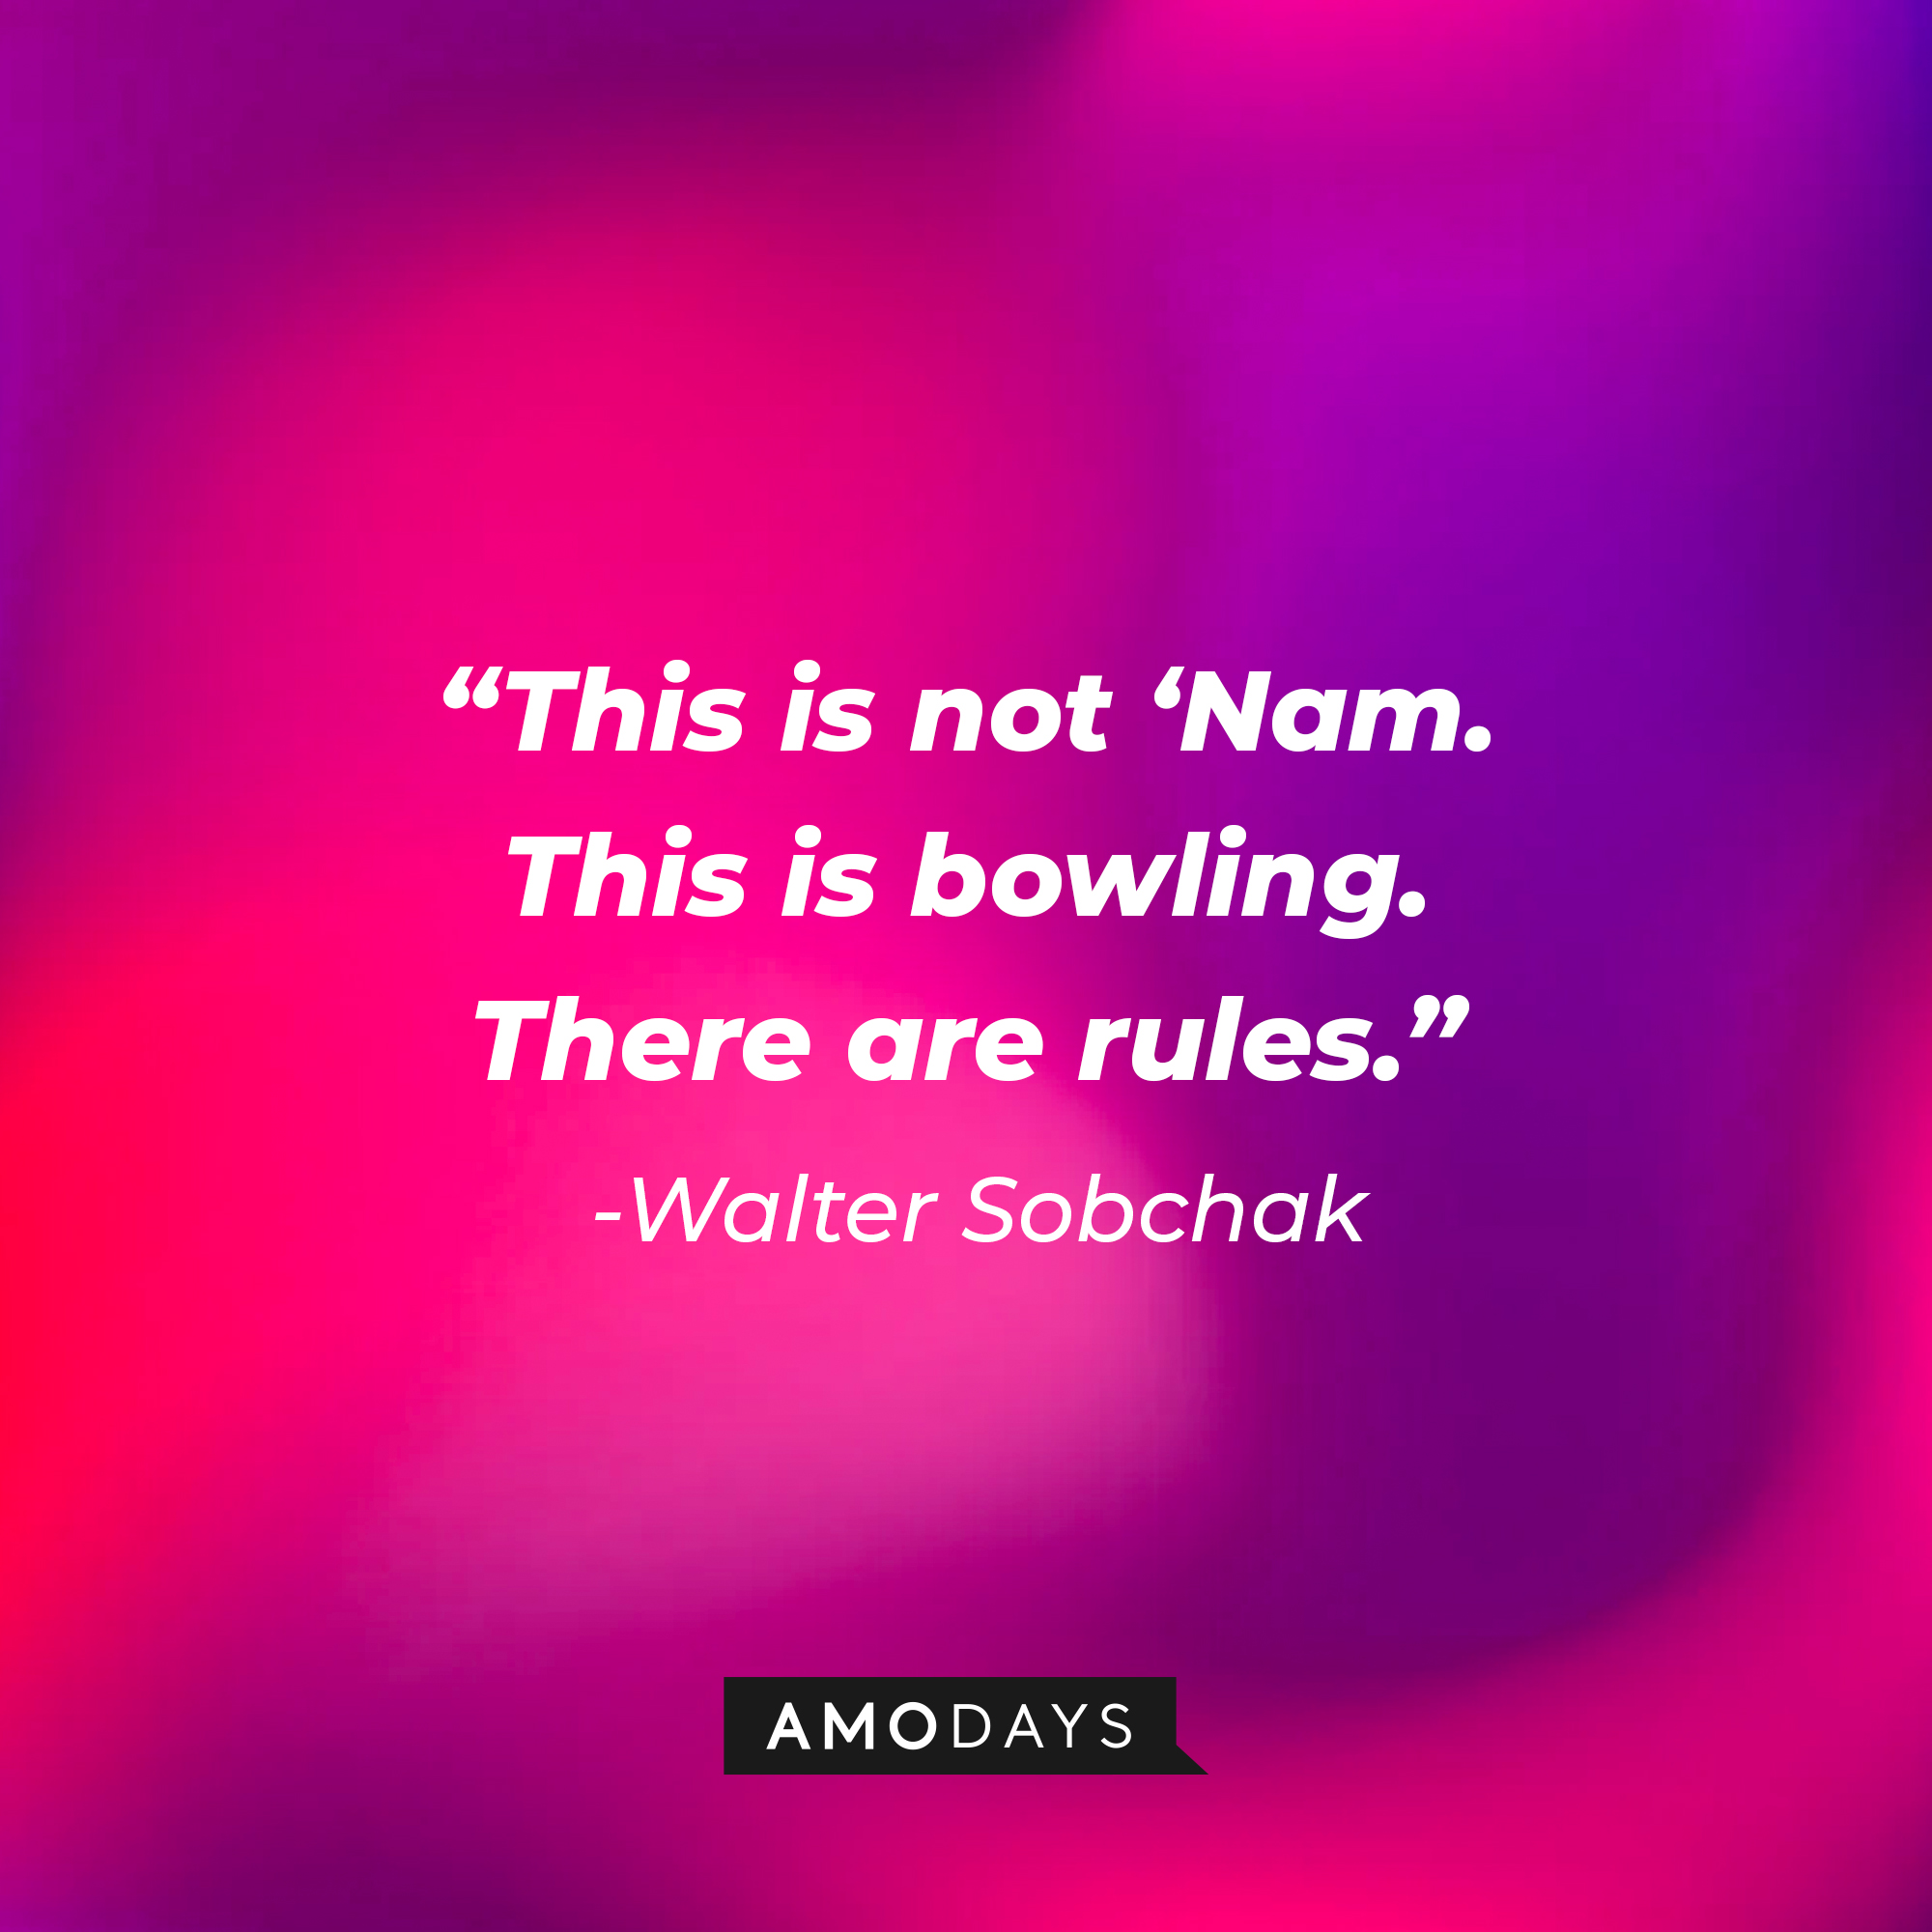 Walter Sobchak’s quote: “This is not ‘Nam. This is bowling. There are rules.” | Source: AmoDays